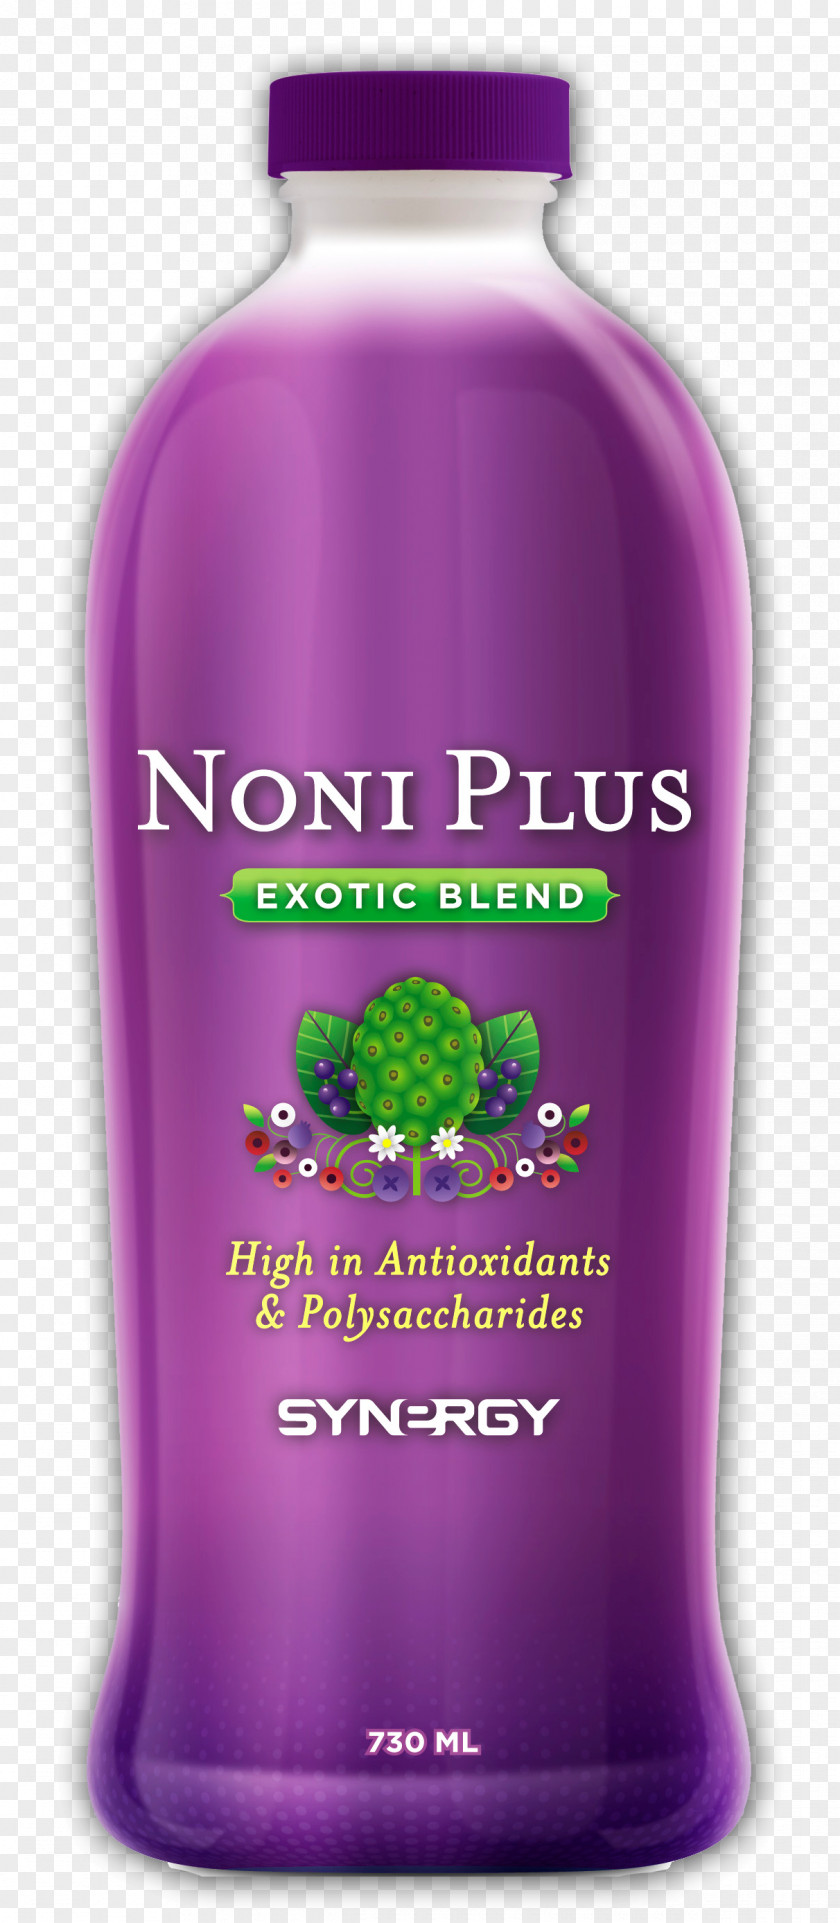 Health Chlorophyll Synergy Poison Detoxification PNG